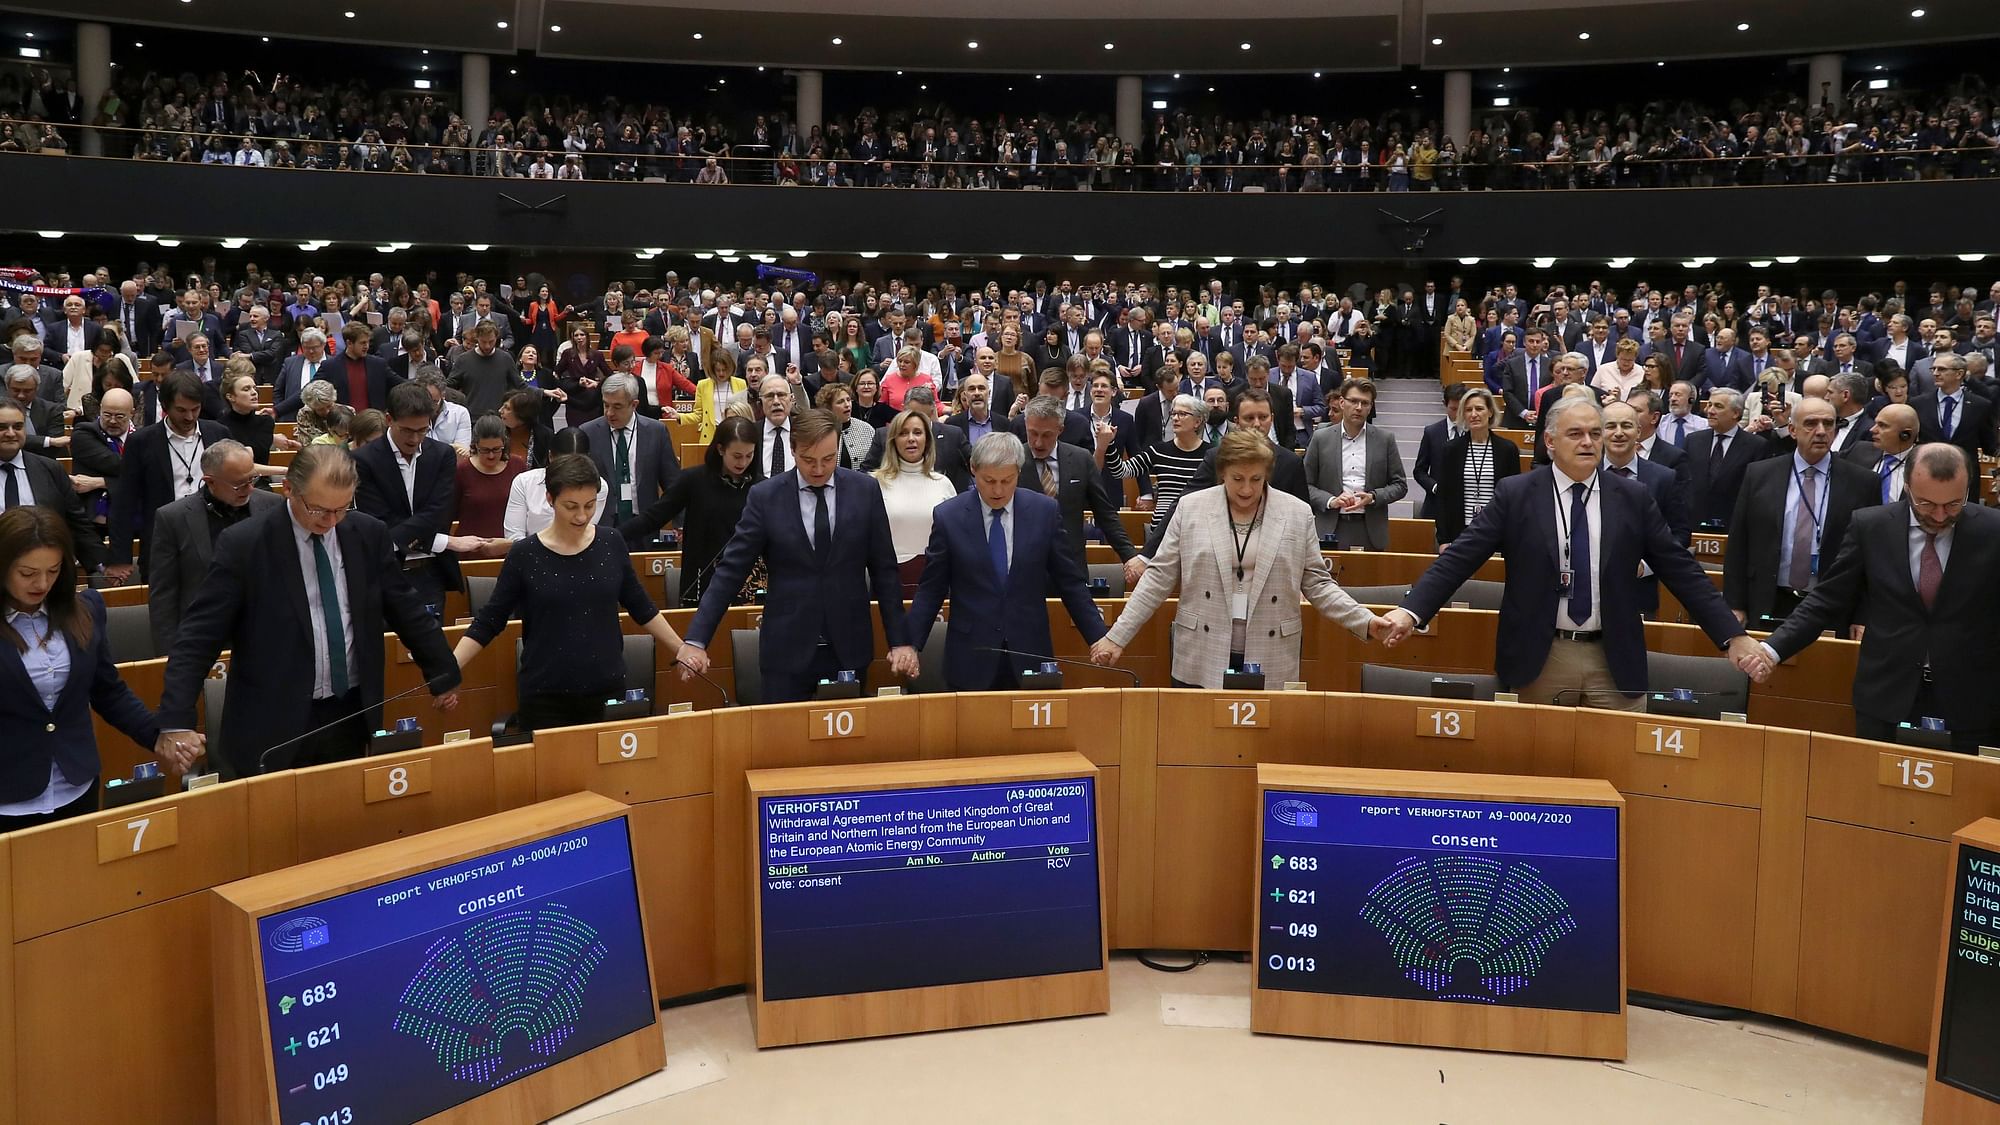 MEP’s sing and hold hands after a vote on the UK’s withdrawal from the EU,